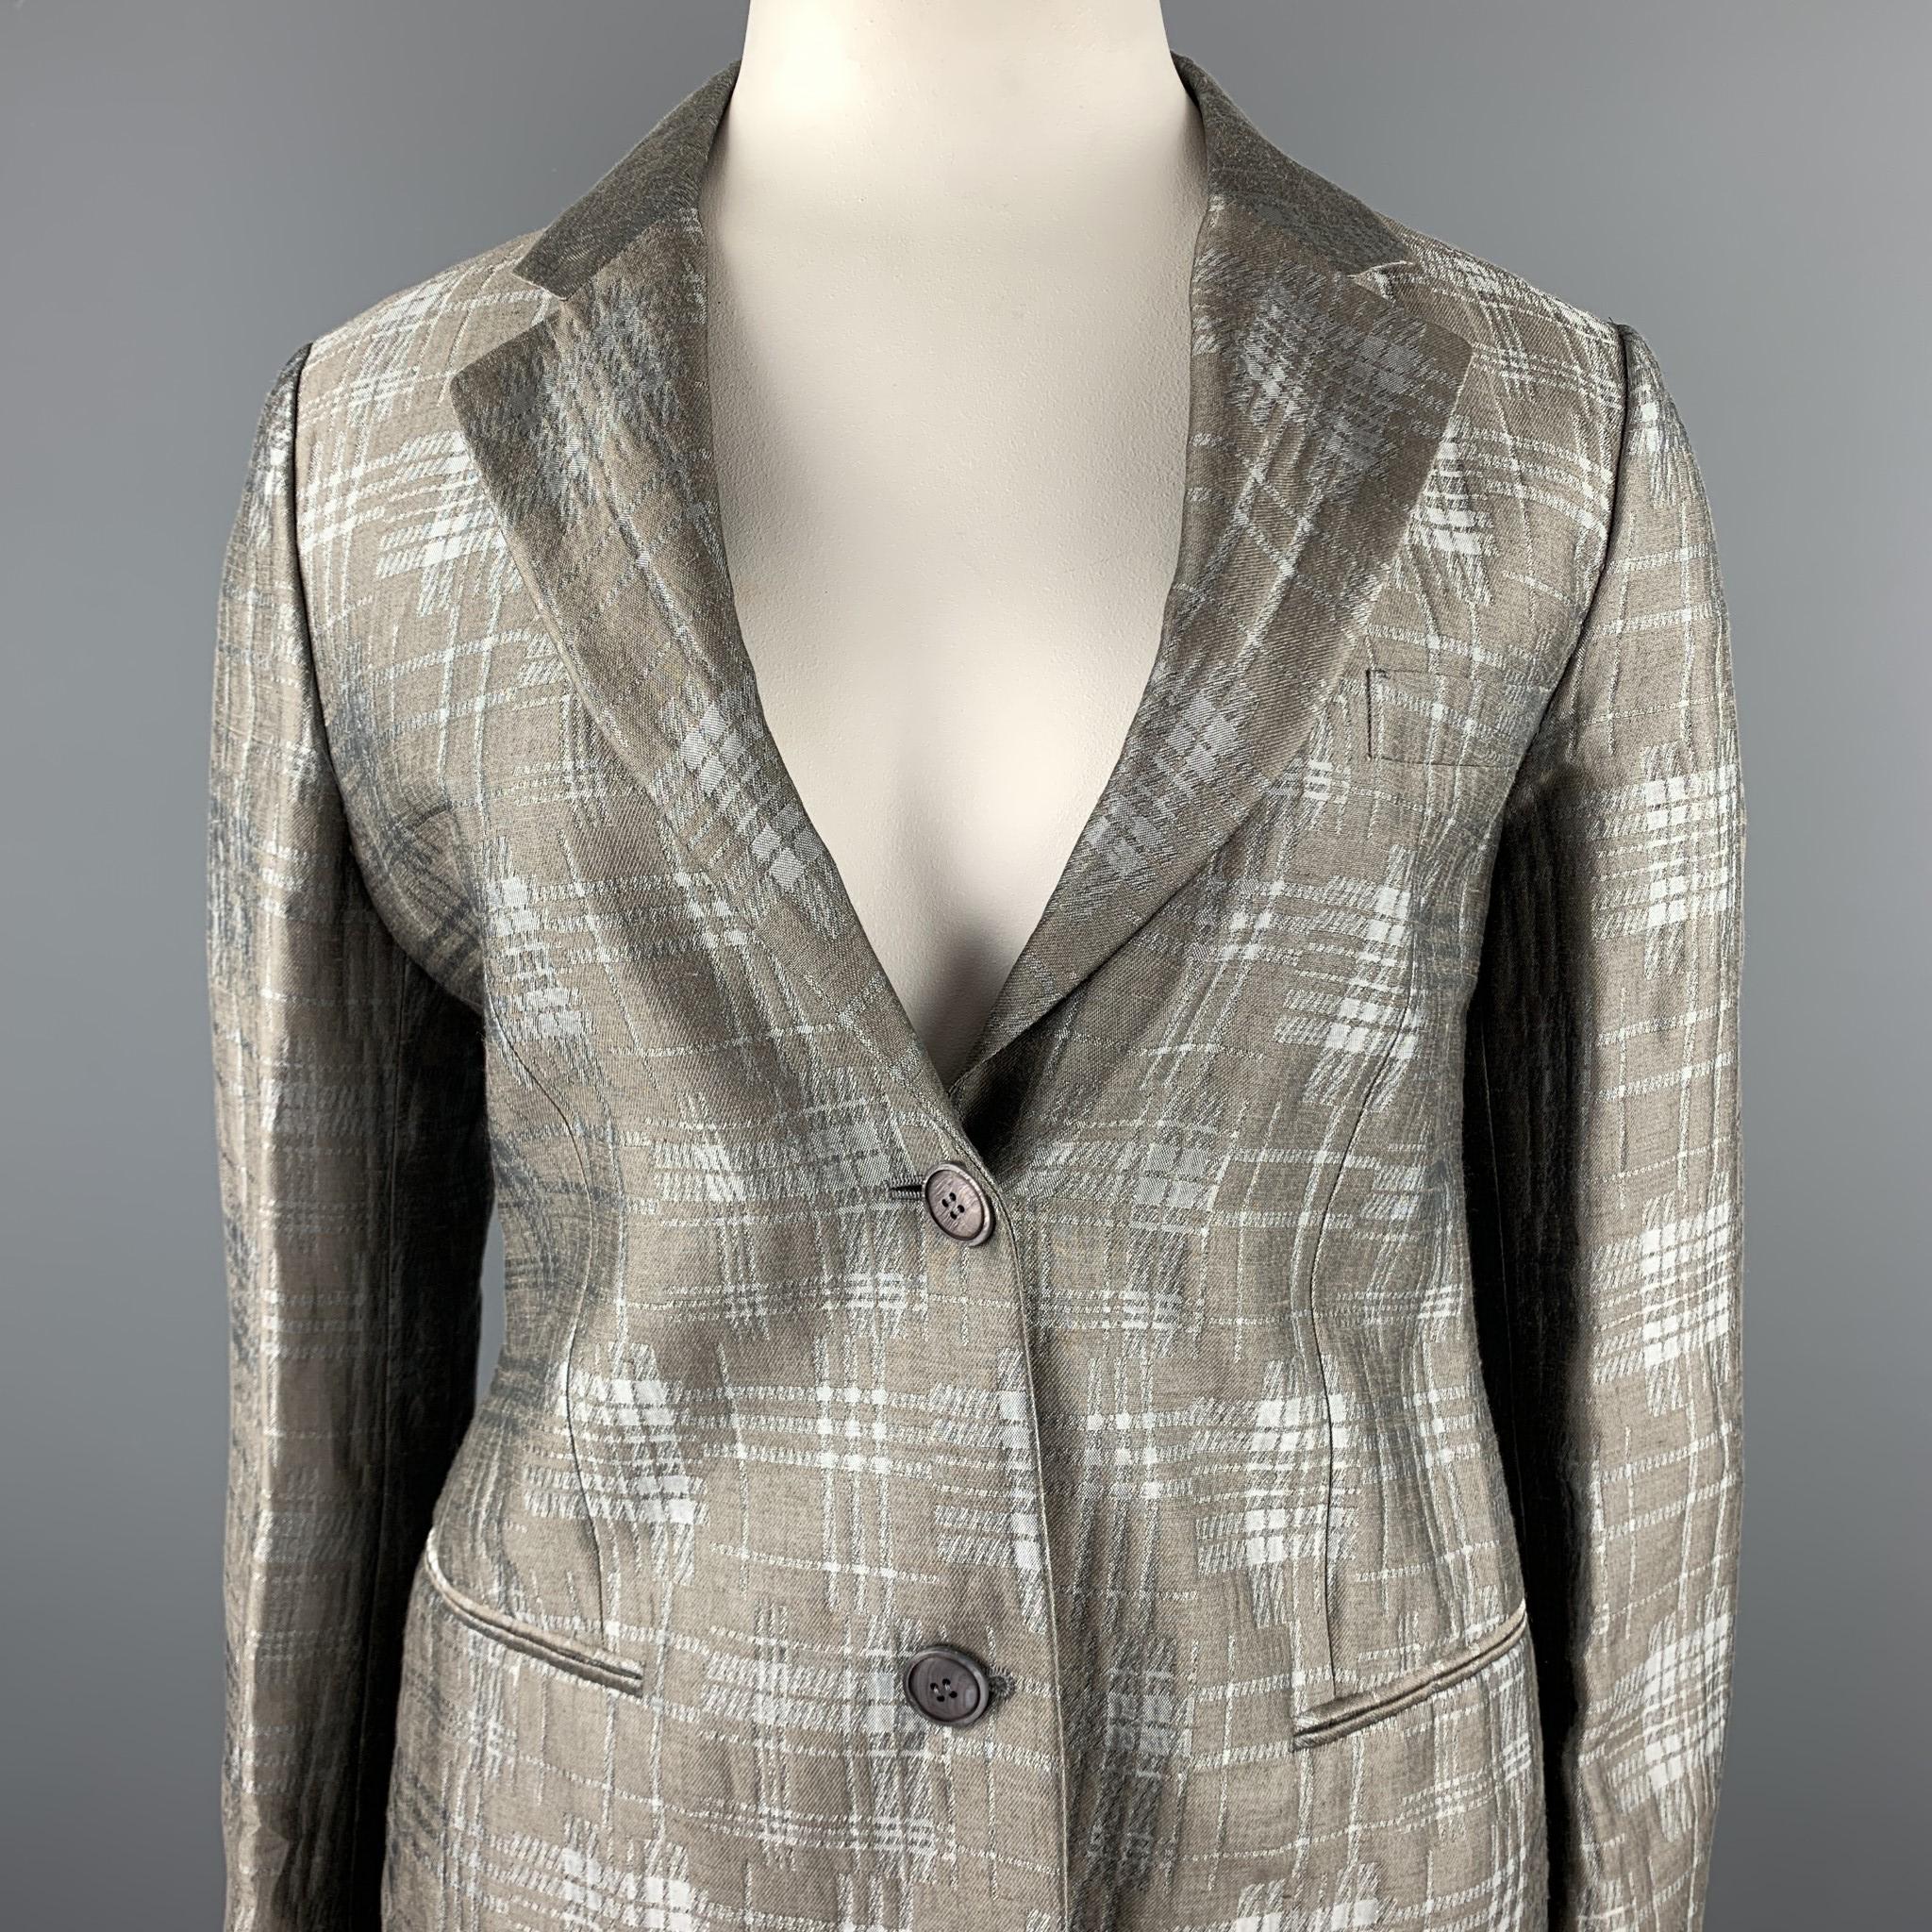 GIORGIO ARMANI blazer comes in a grey plaid jacquard linen blend with a half stripe liner featuring a notch lapel, slit pockets, and a two button closure. Made in Italy.

Excellent Pre-Owned Condition.
Marked: IT 46

Measurements:

Shoulder: 16.5